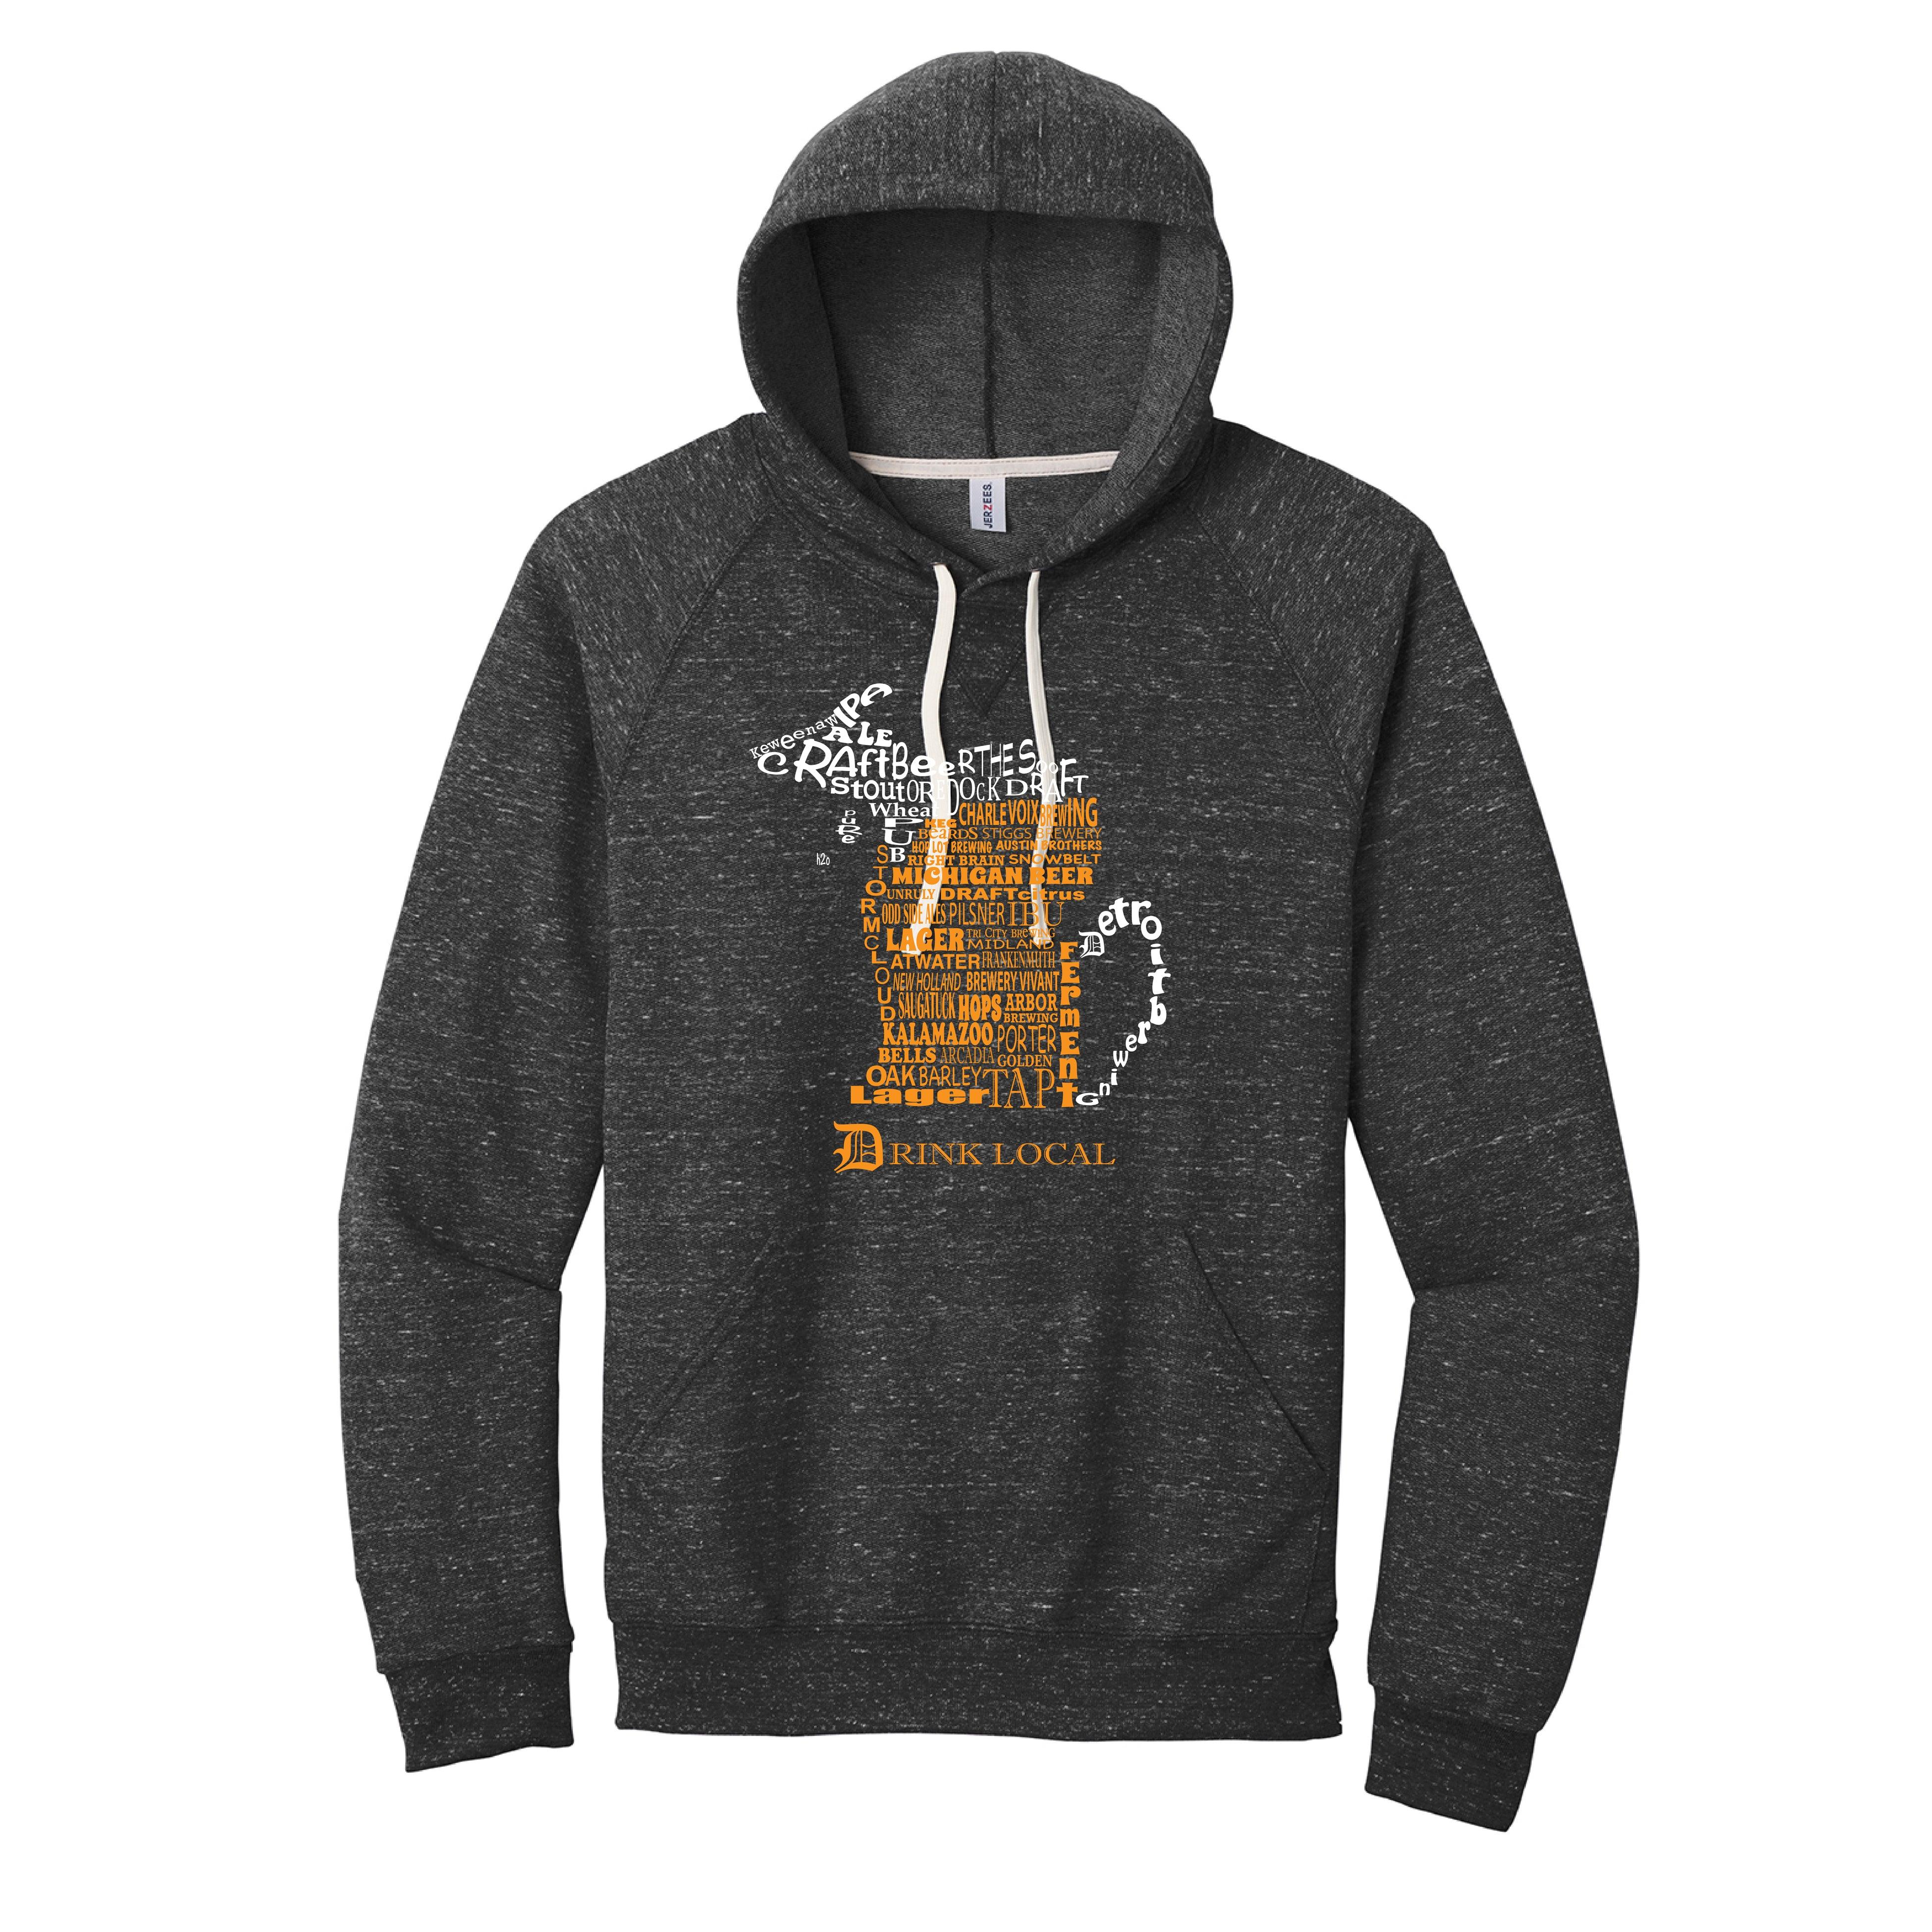 Adventure-Ready Apparel for Craft Beer Enthusiasts